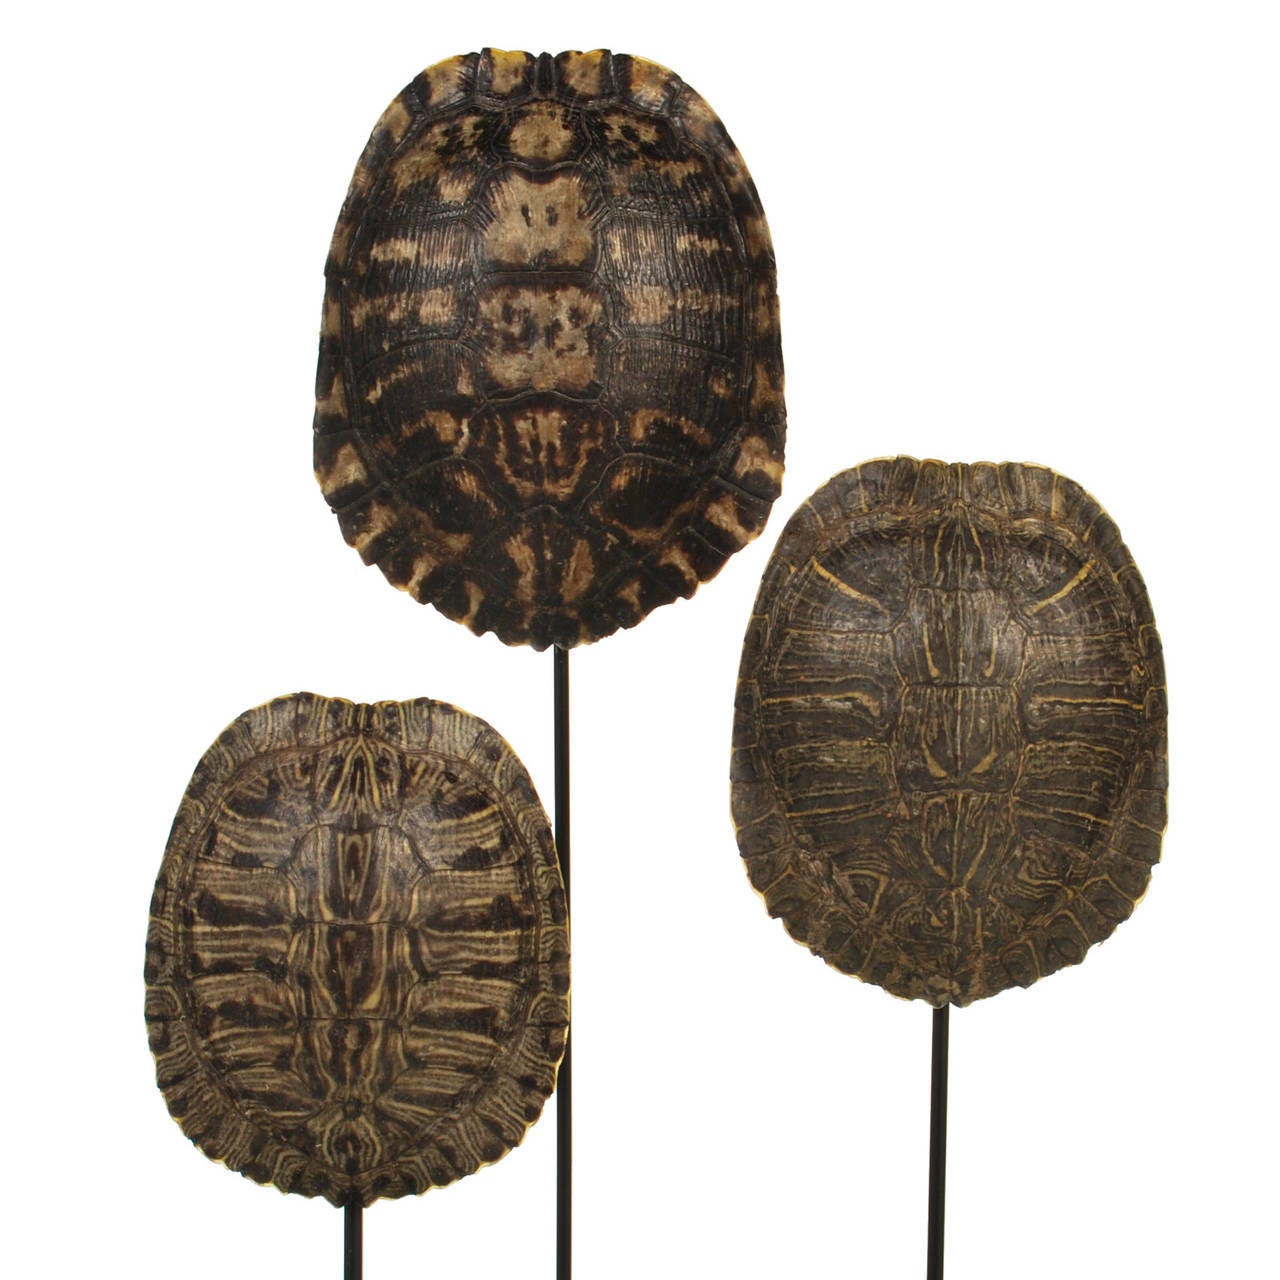 American Collection of Authentic Turtle Shells on Steel Display Stands